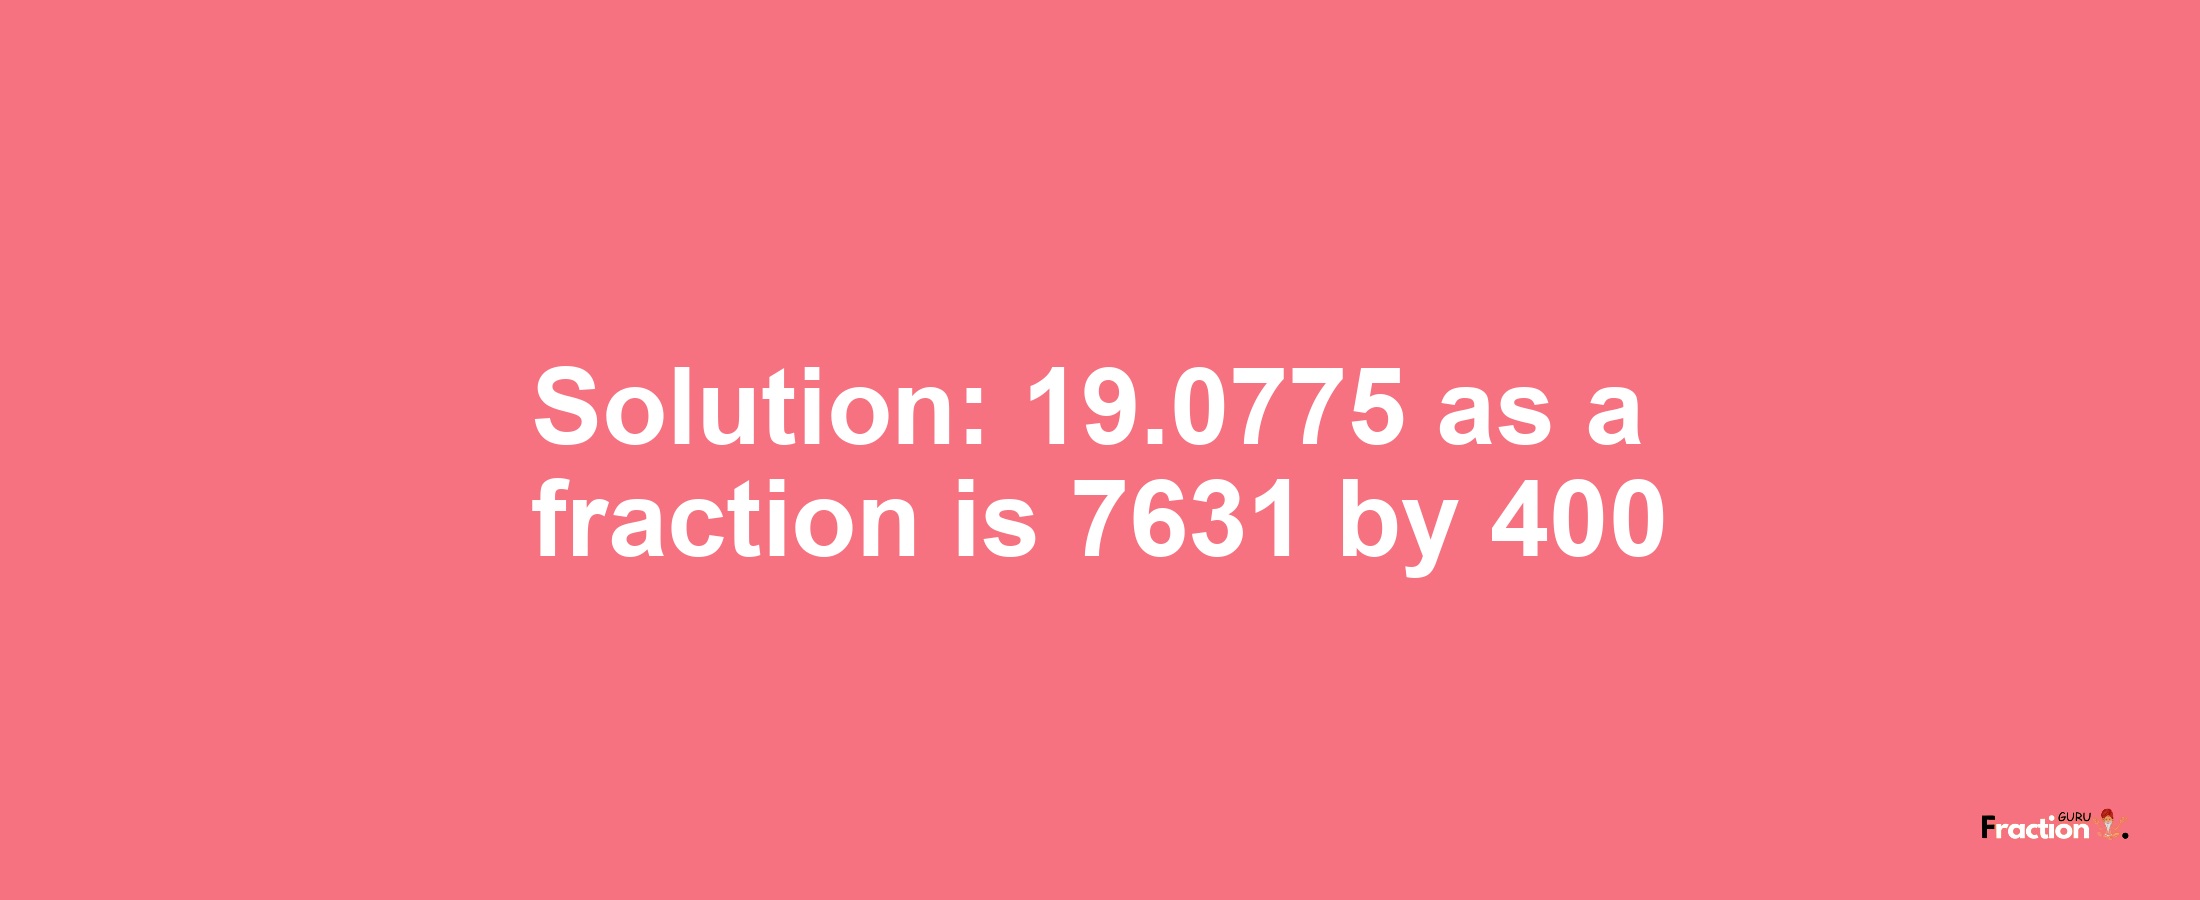 Solution:19.0775 as a fraction is 7631/400